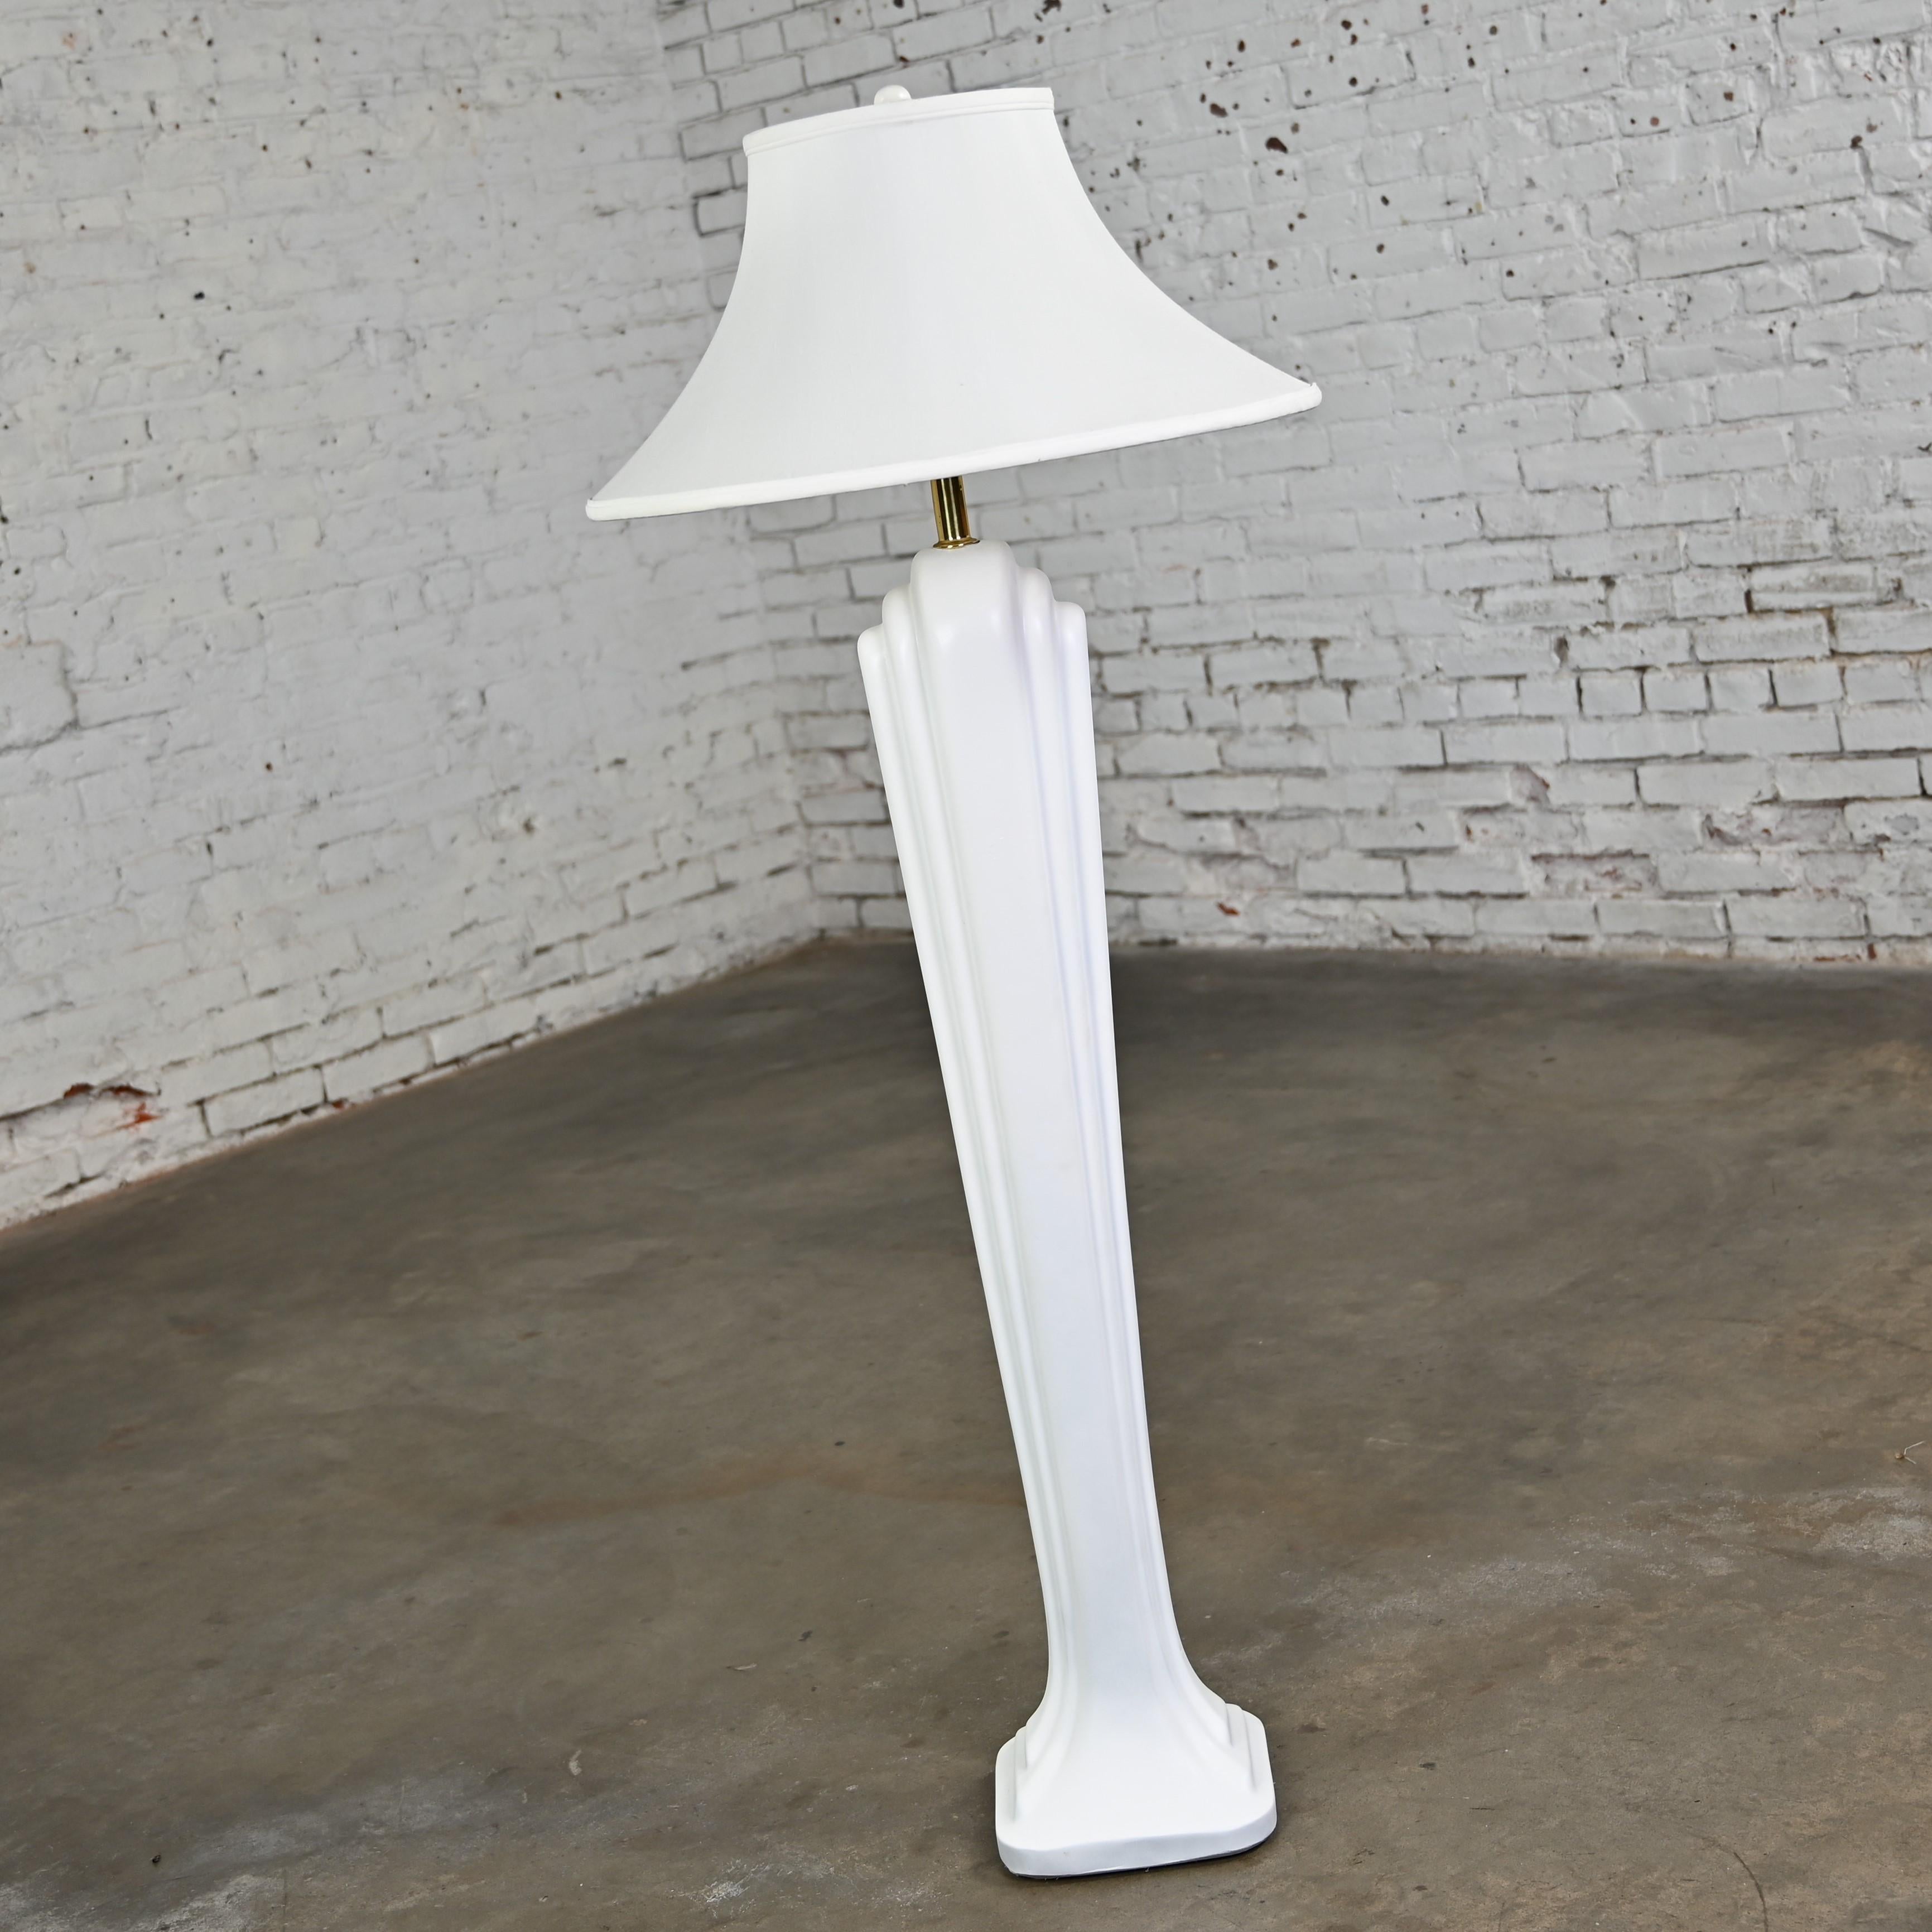 Art Deco Revival to Postmodern Paolo Gucci Floor Lamp White Sculpted Resin  For Sale 10